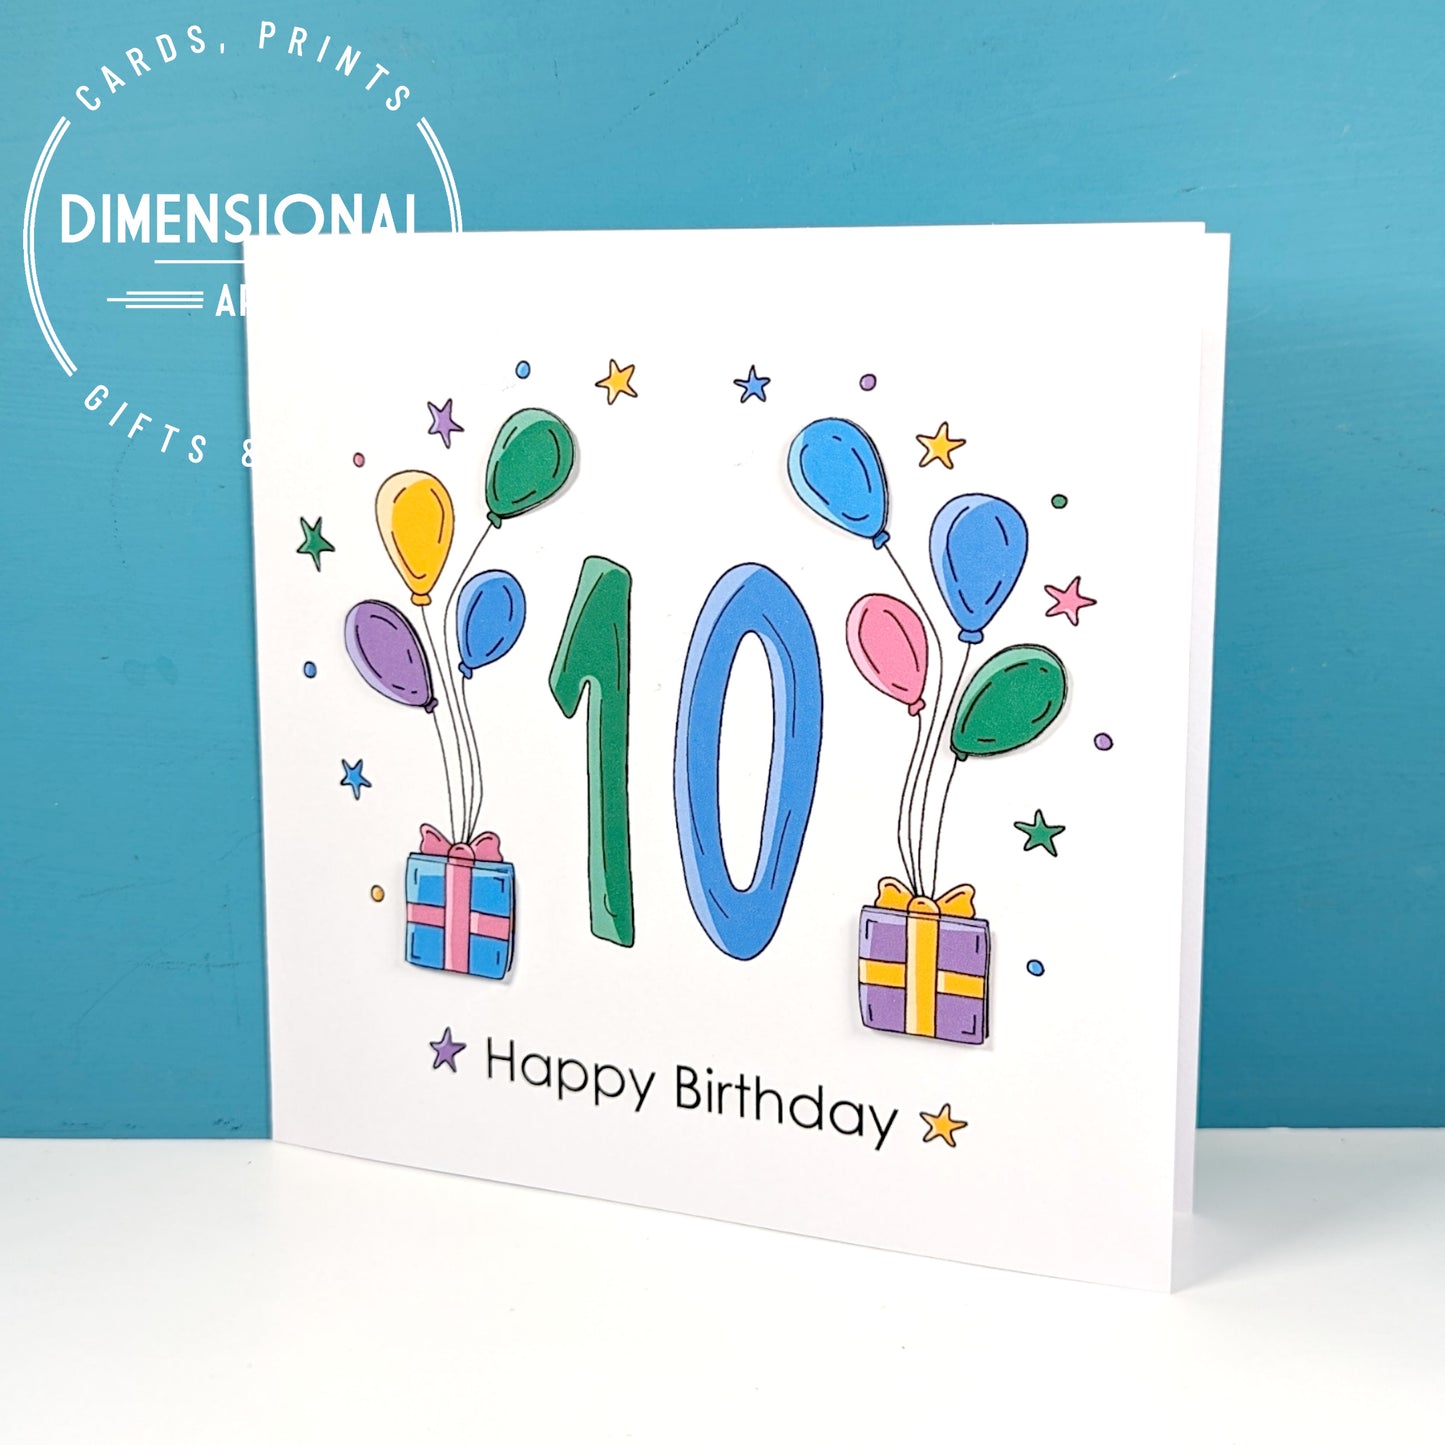 10th balloons and presents Birthday Card